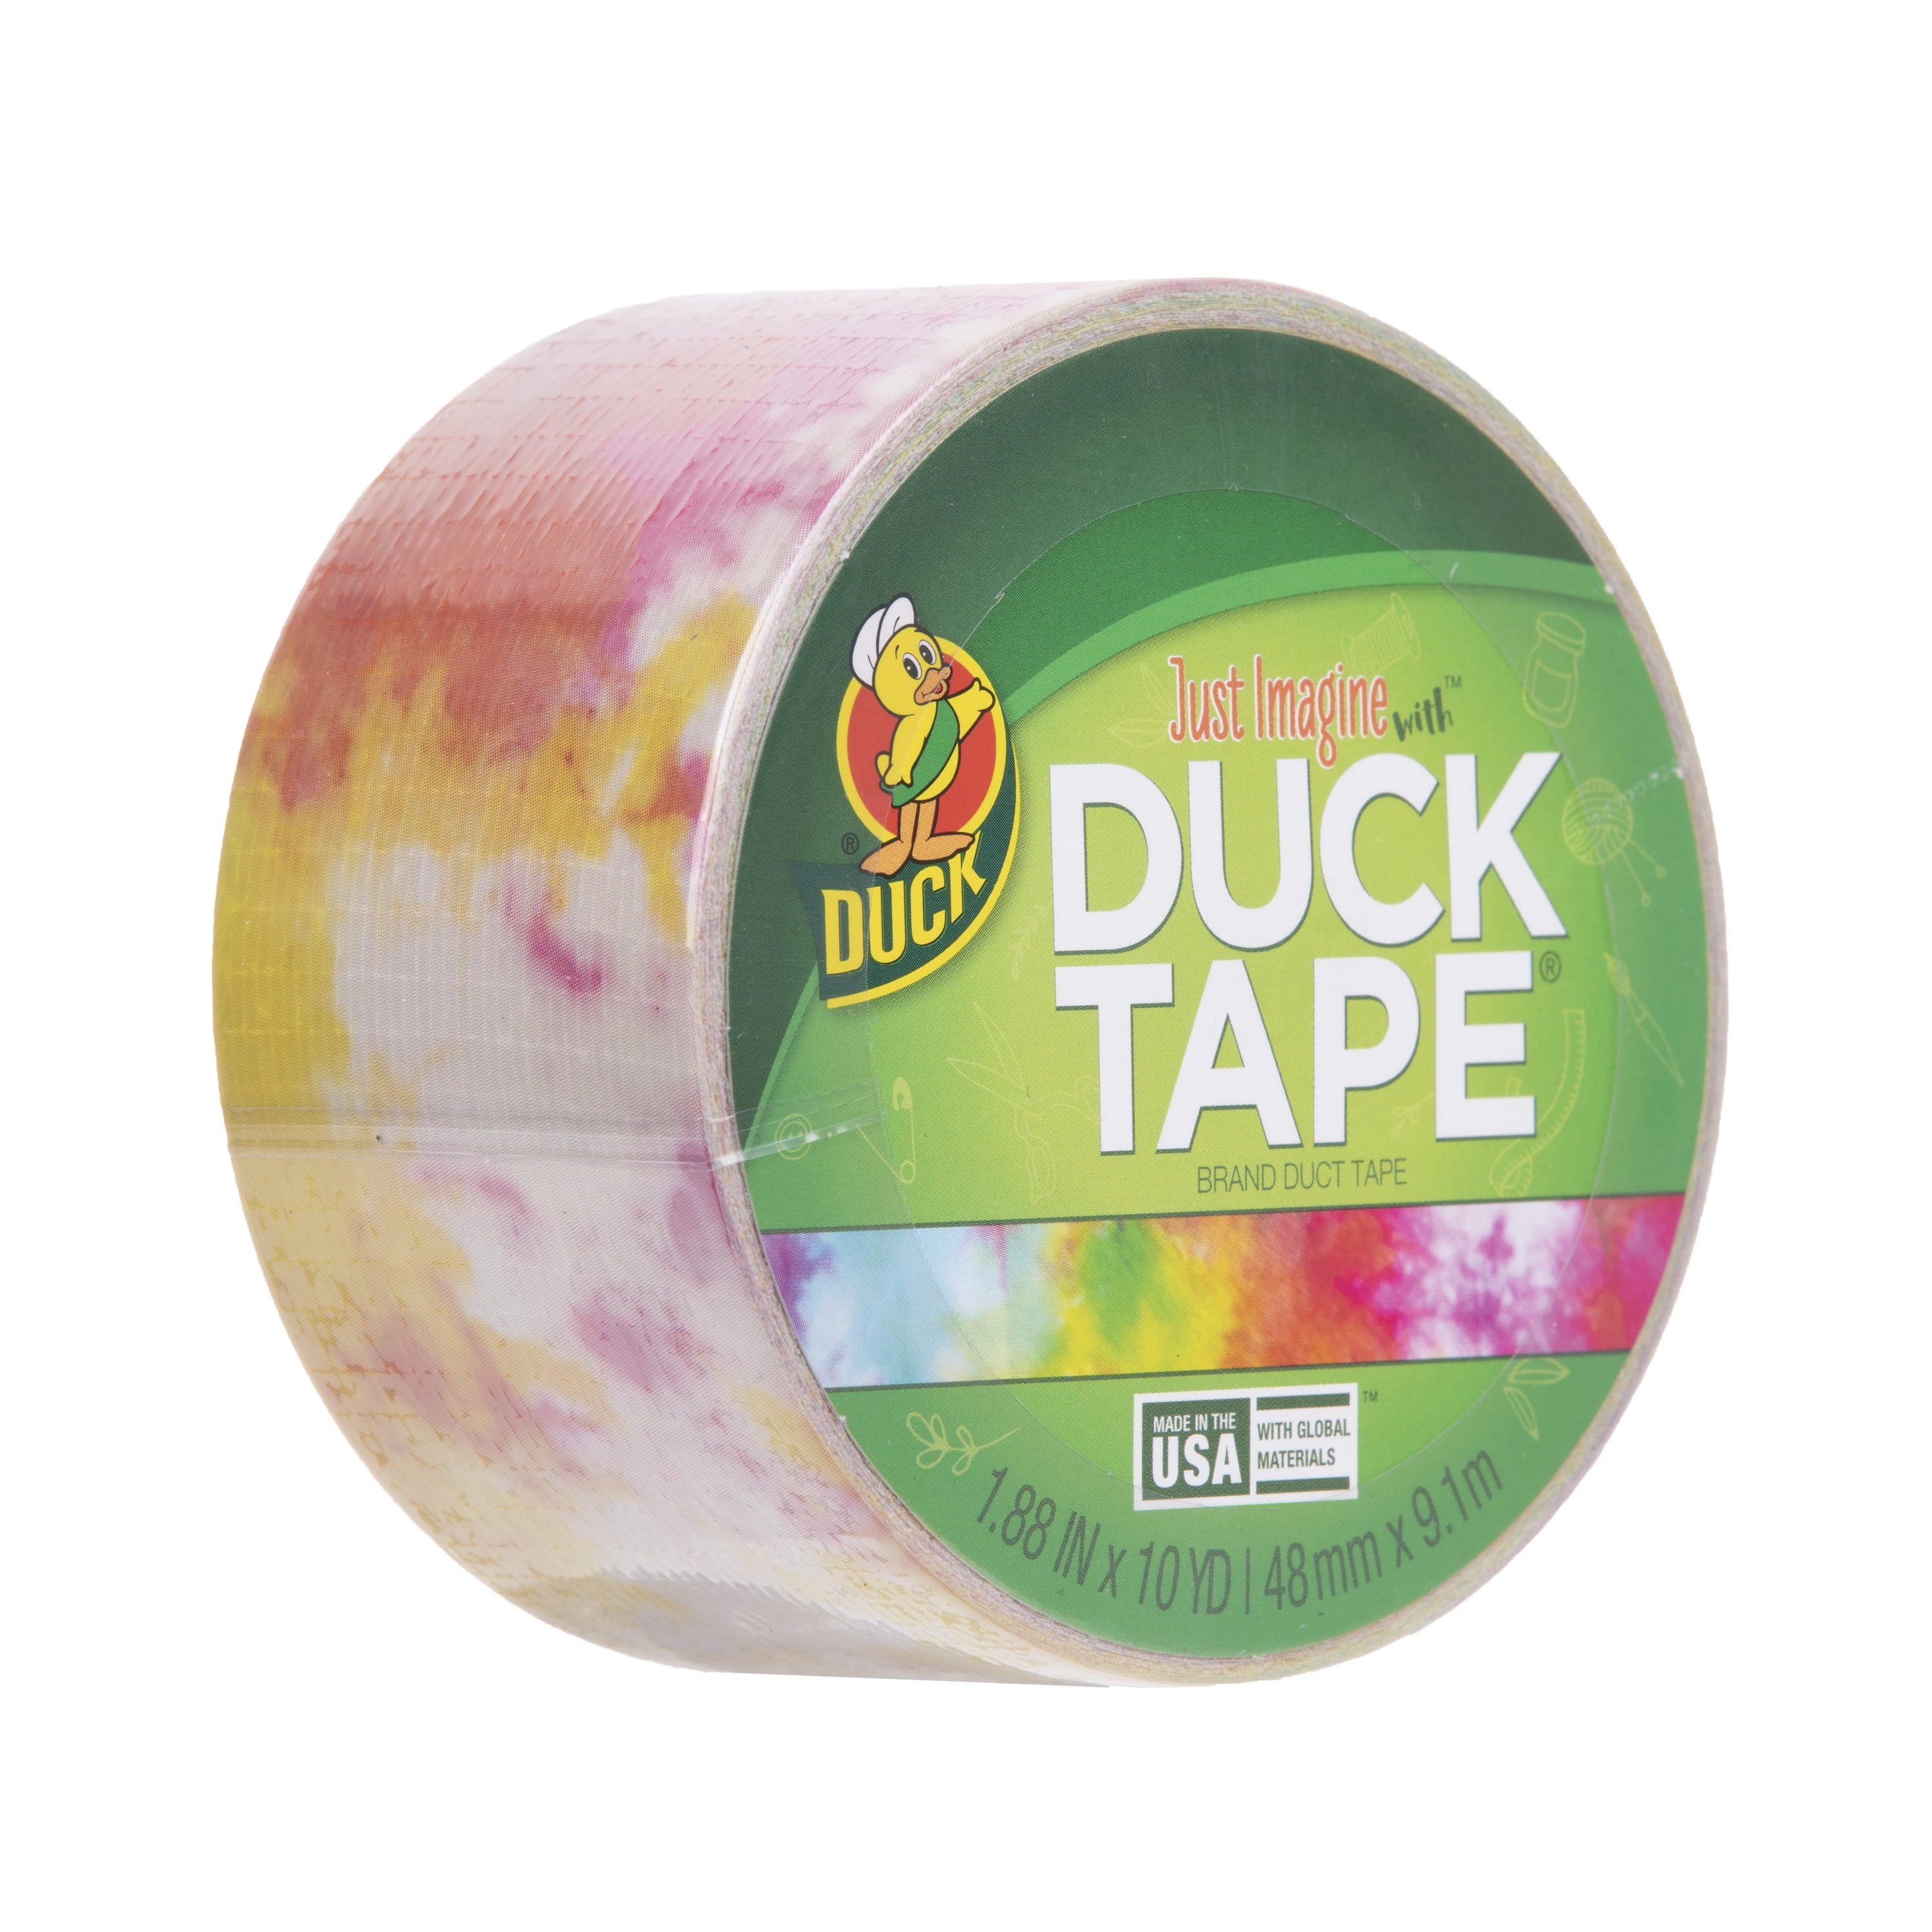 Printed Duck Tape Brand Duct Tape - Starry Galaxy 10 Yards 